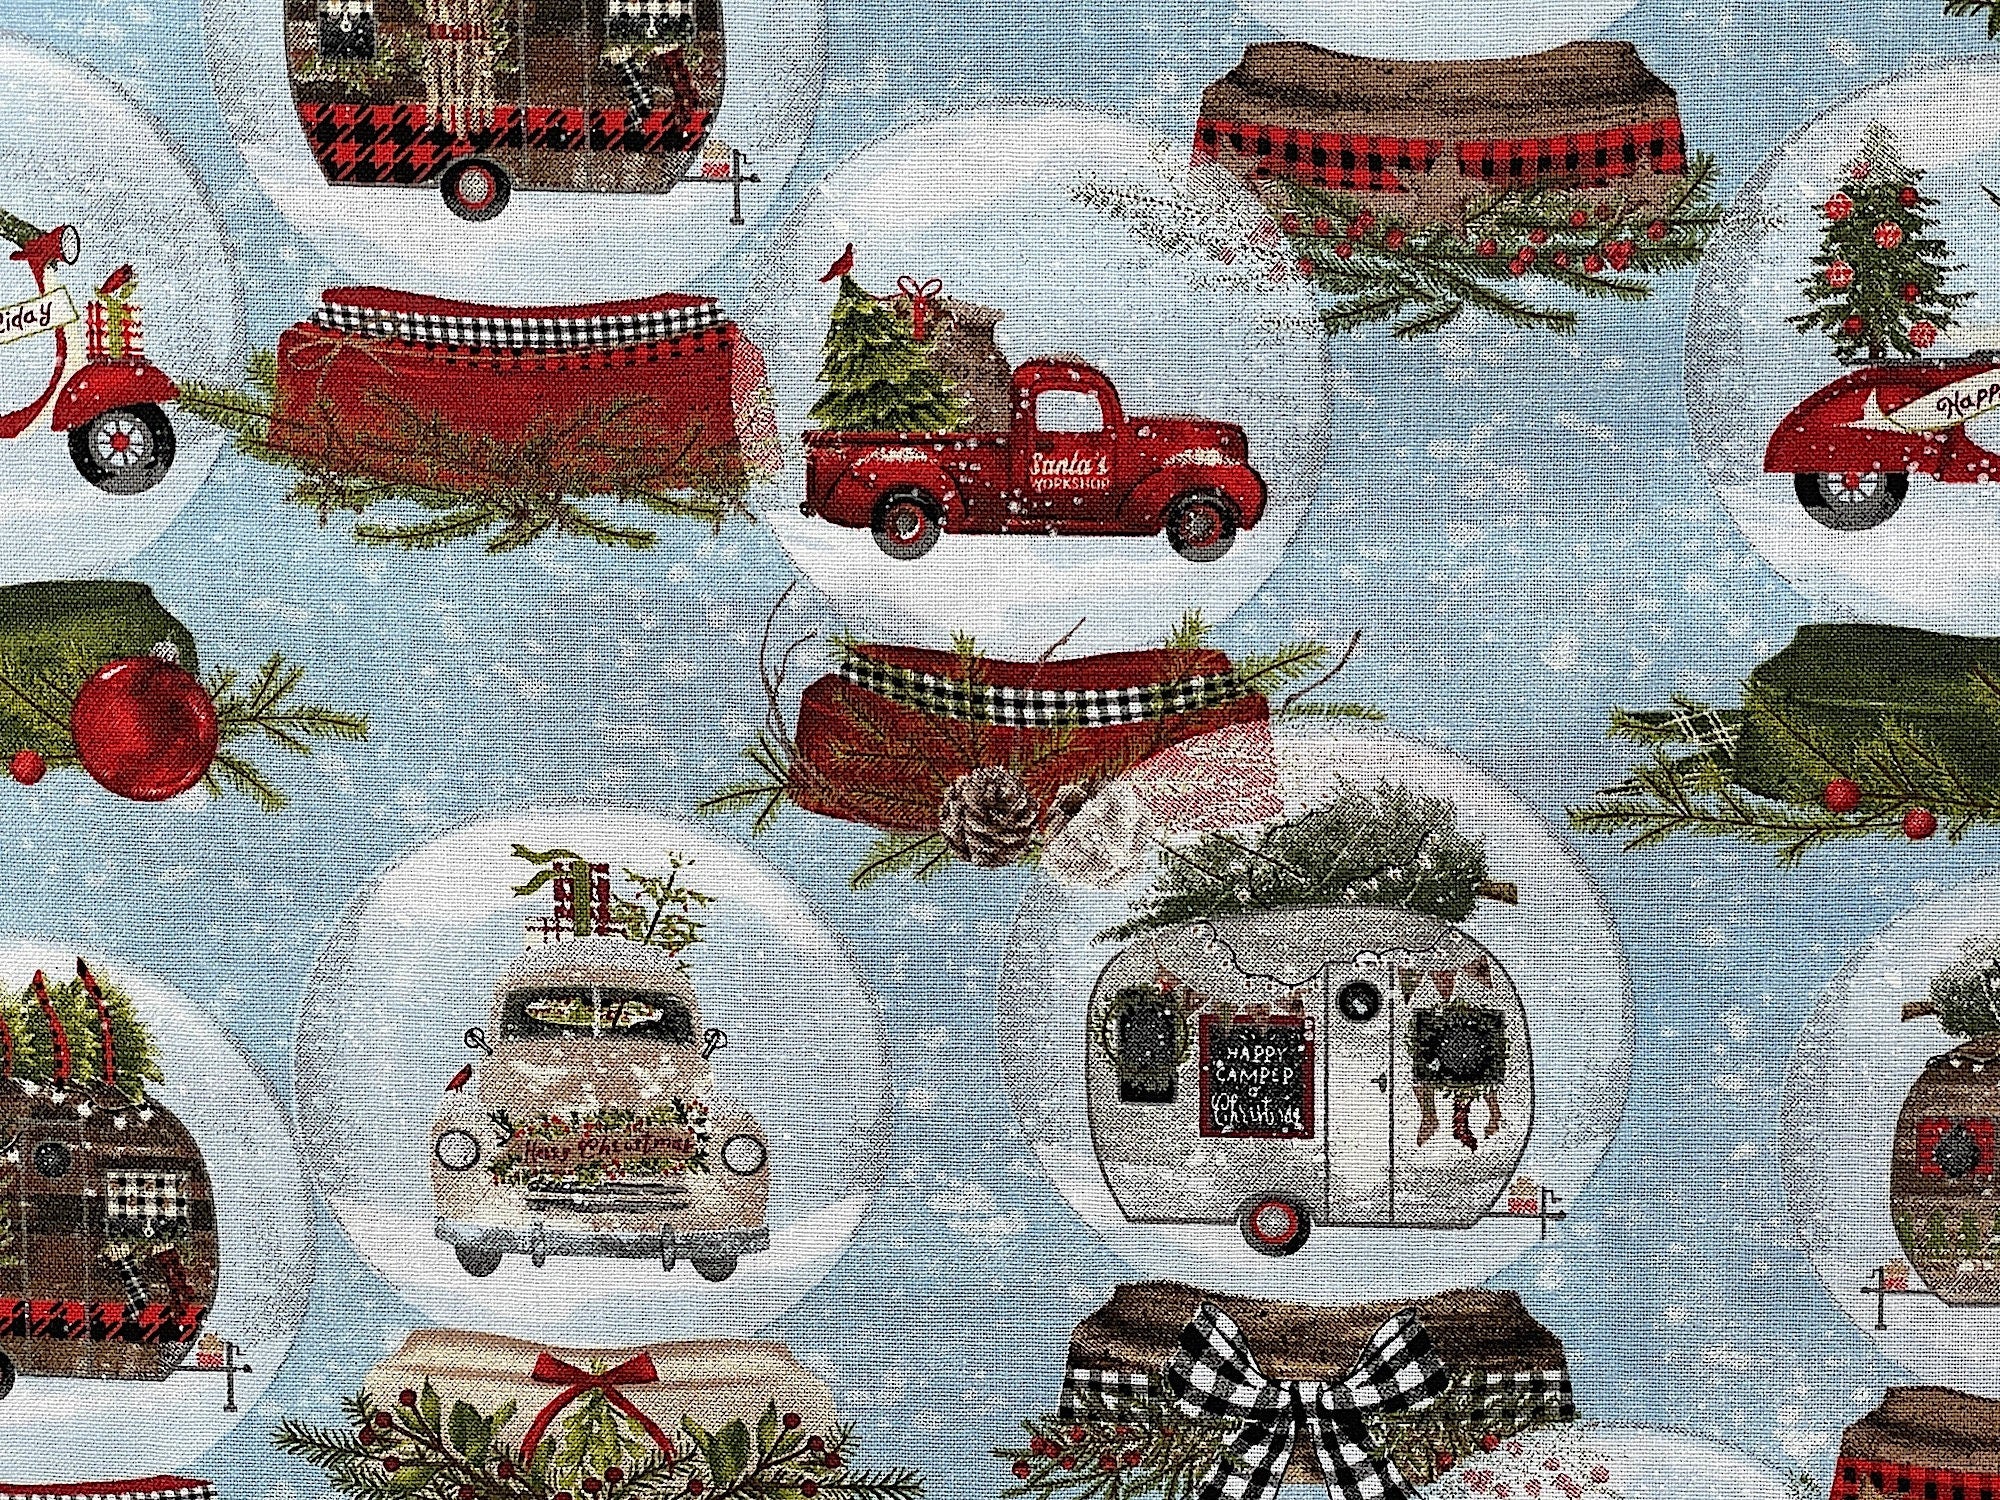 Close up of a red truck inside a snow globe.